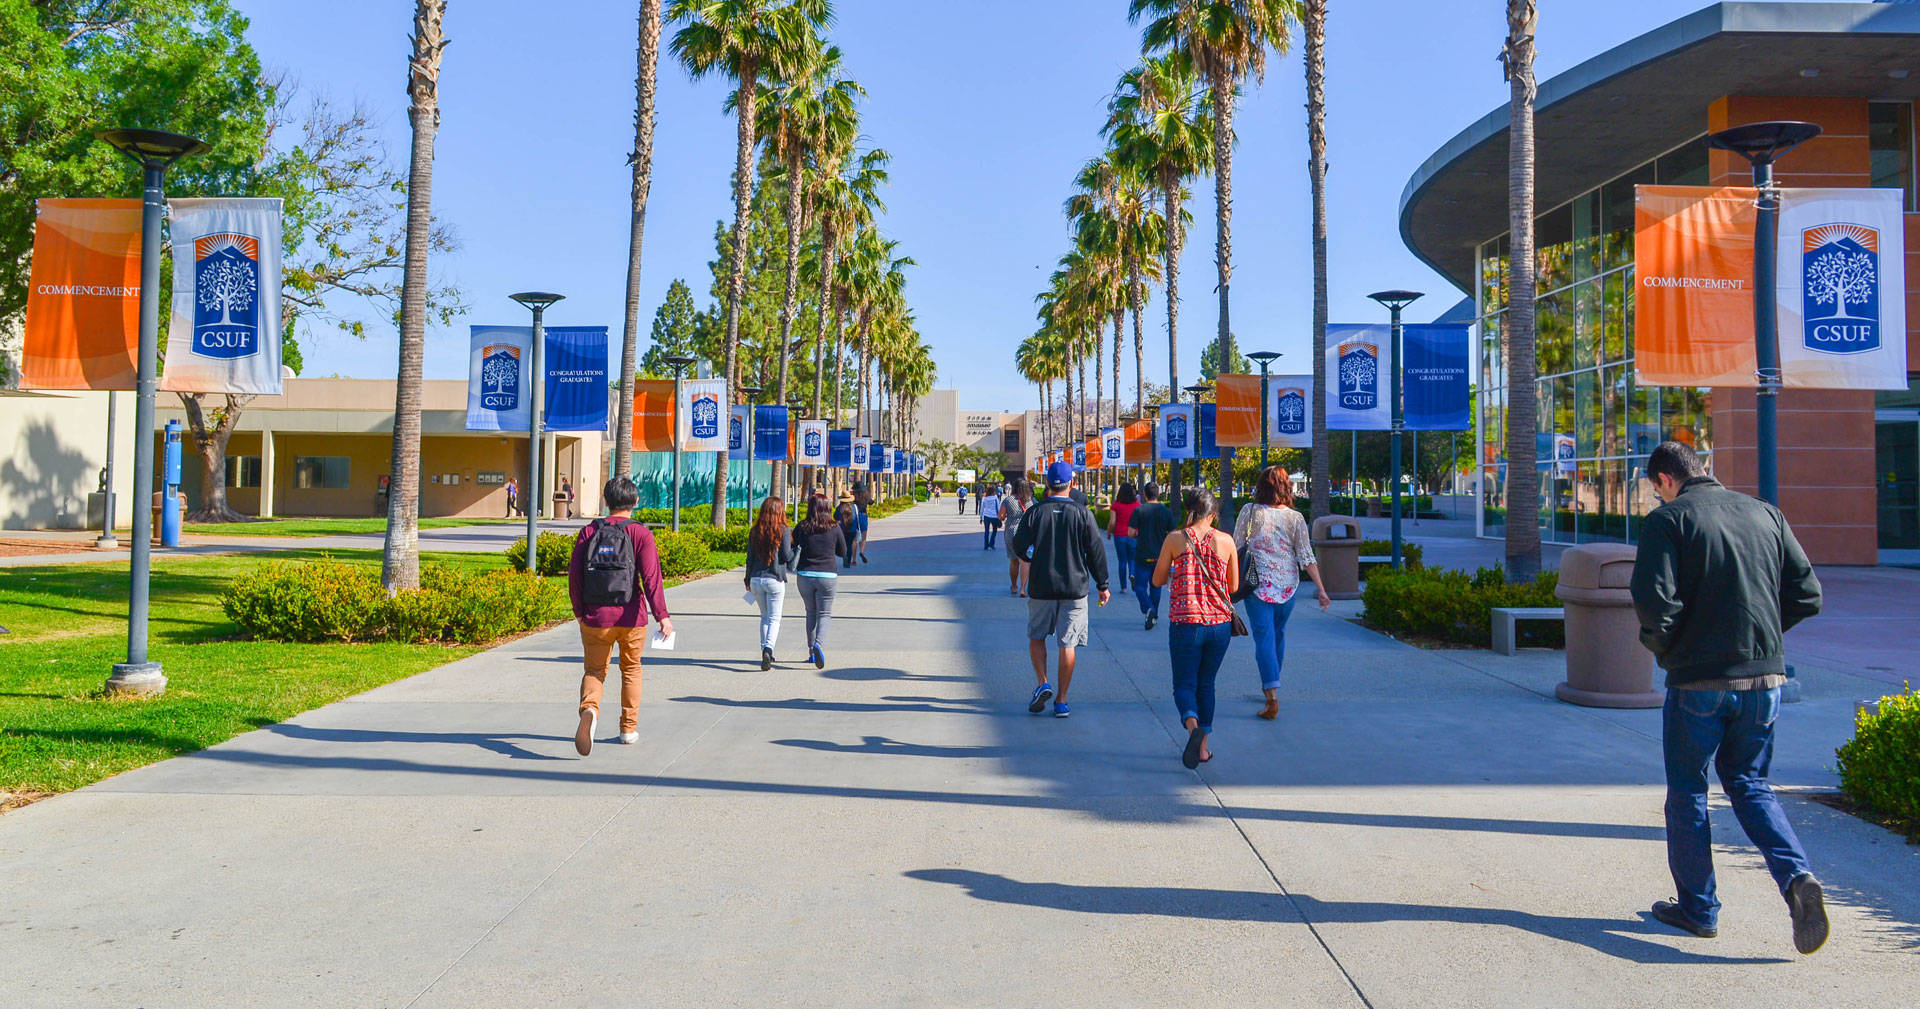 Students walk on the campus of California State University, Fullerton. Jack Miller/Flickr